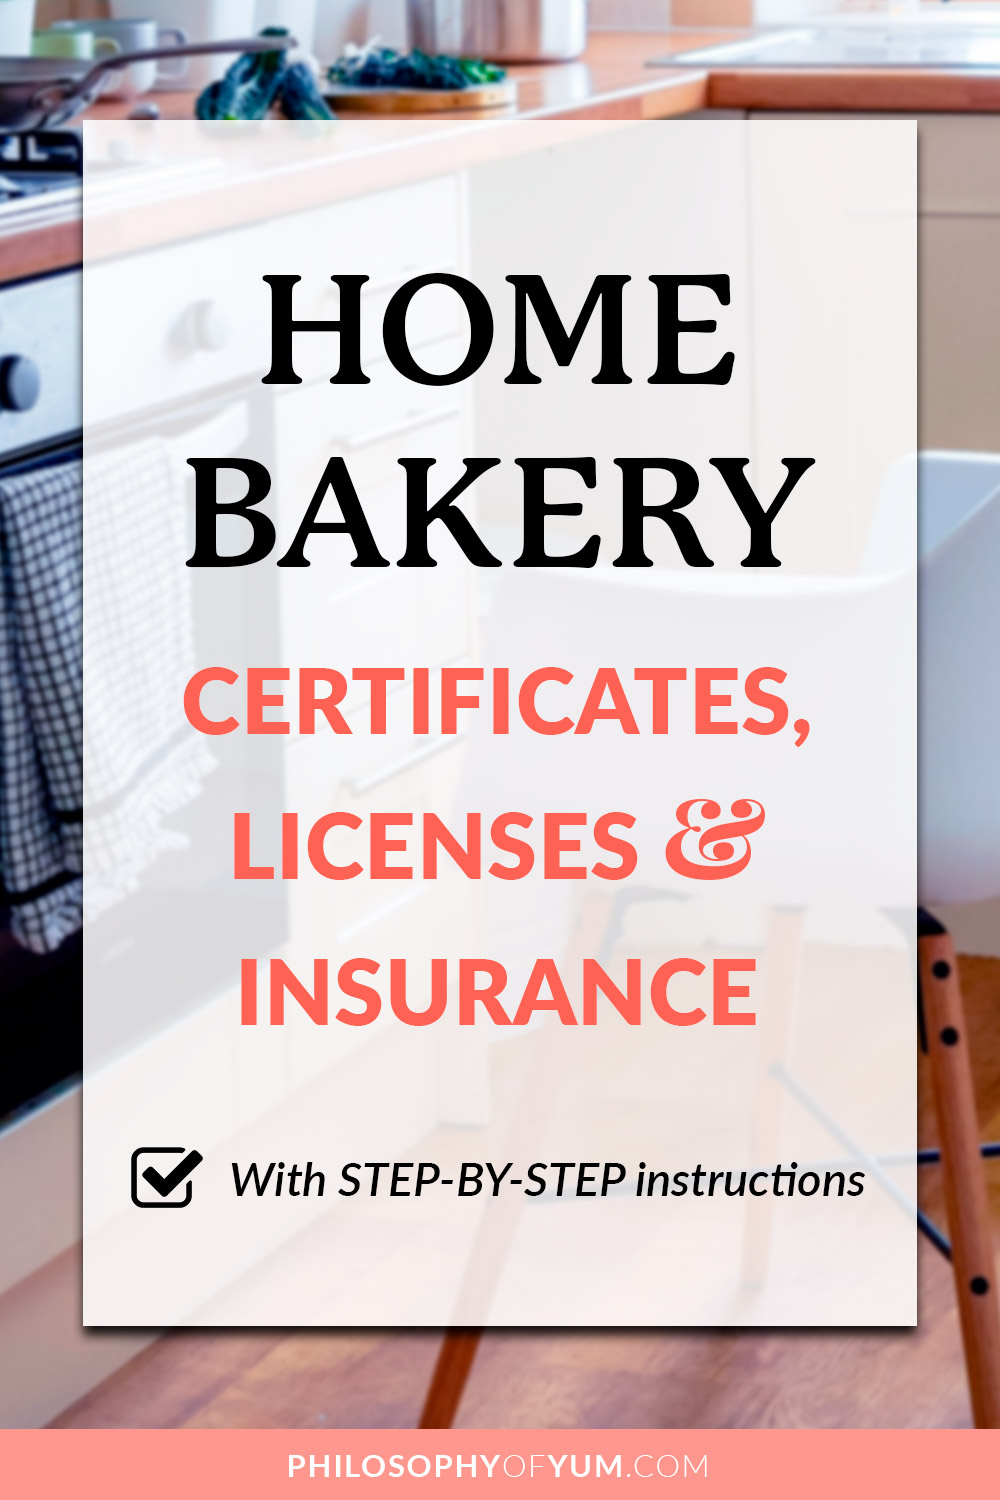 You want to start a baking business from home - that's AWESOME! And YES, you need a specific license from your local authorities before you can bake and sell LEGALLY from your home kitchen. BUT don't let that put you off! It's actually really simple to get your Home Bakery business license (or certificate) and other official documents. Let me guide you through the entire process, step-by-step, and give you some extra tips to make this as easy as possible for you. This post covers insurance too!